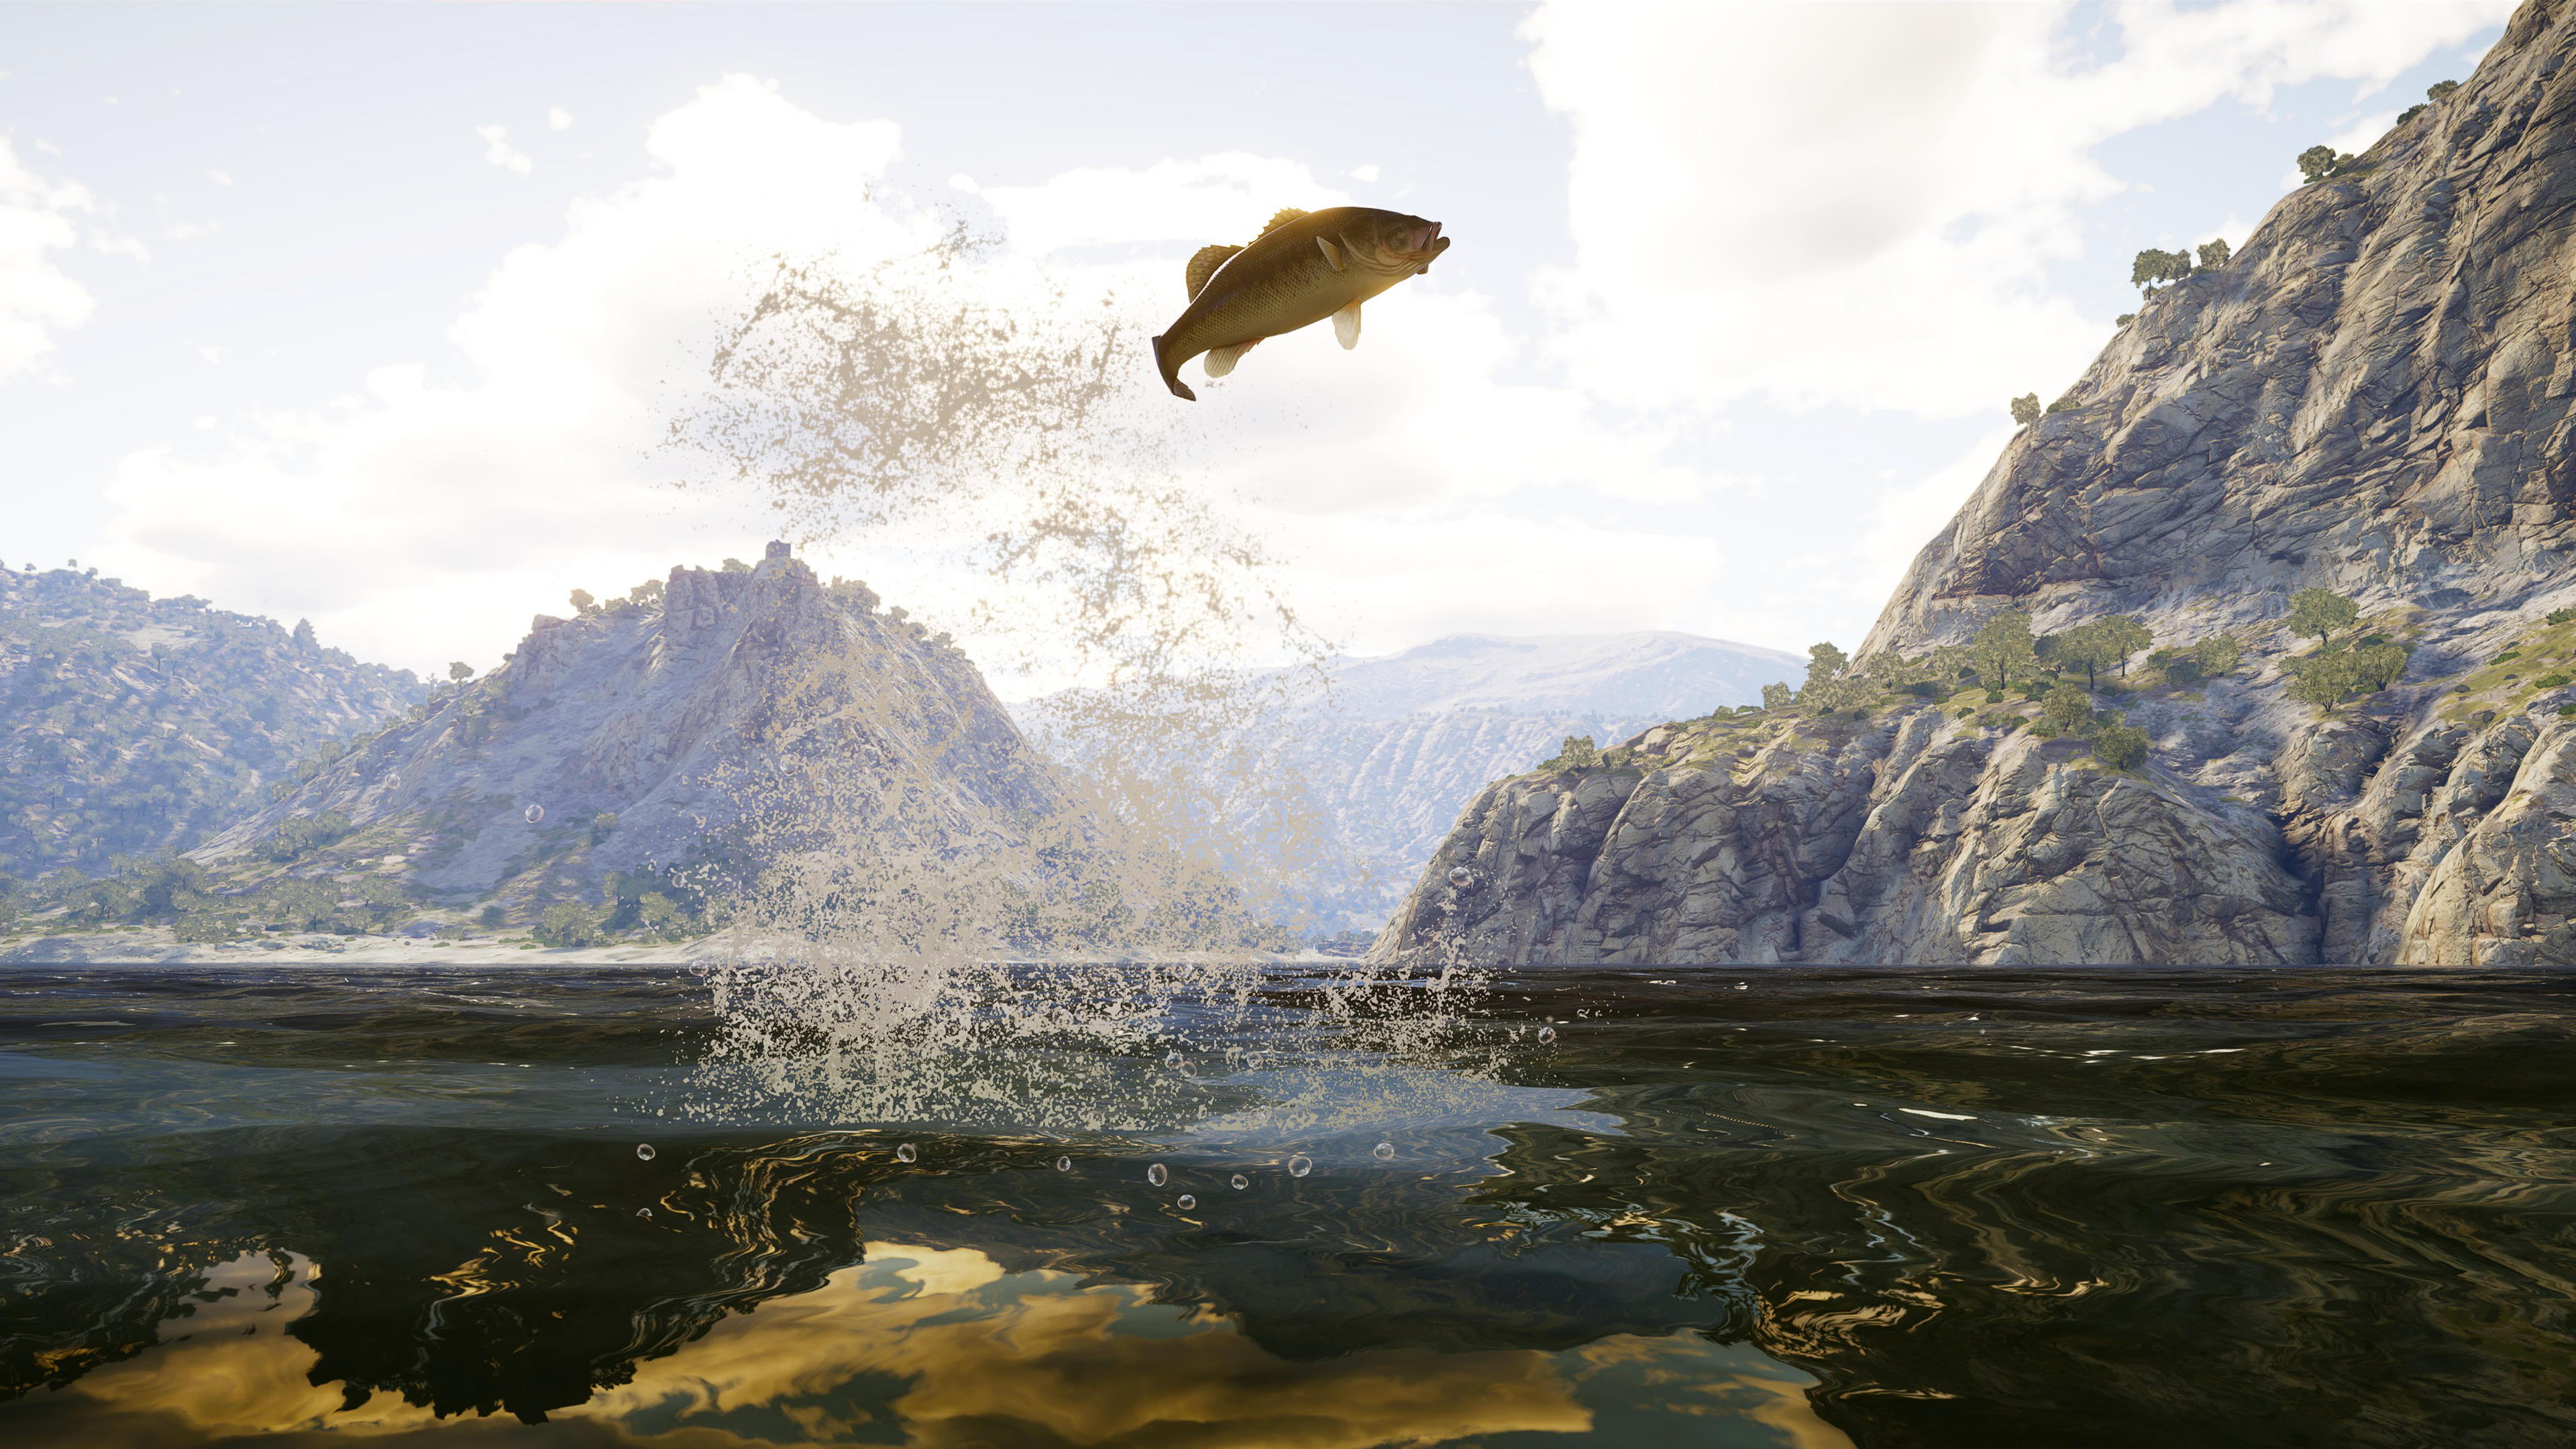 A screenshot of a jumping fish taken within Call of the Wild: The Angler's Aguas Claras Reserve, located in Spain.